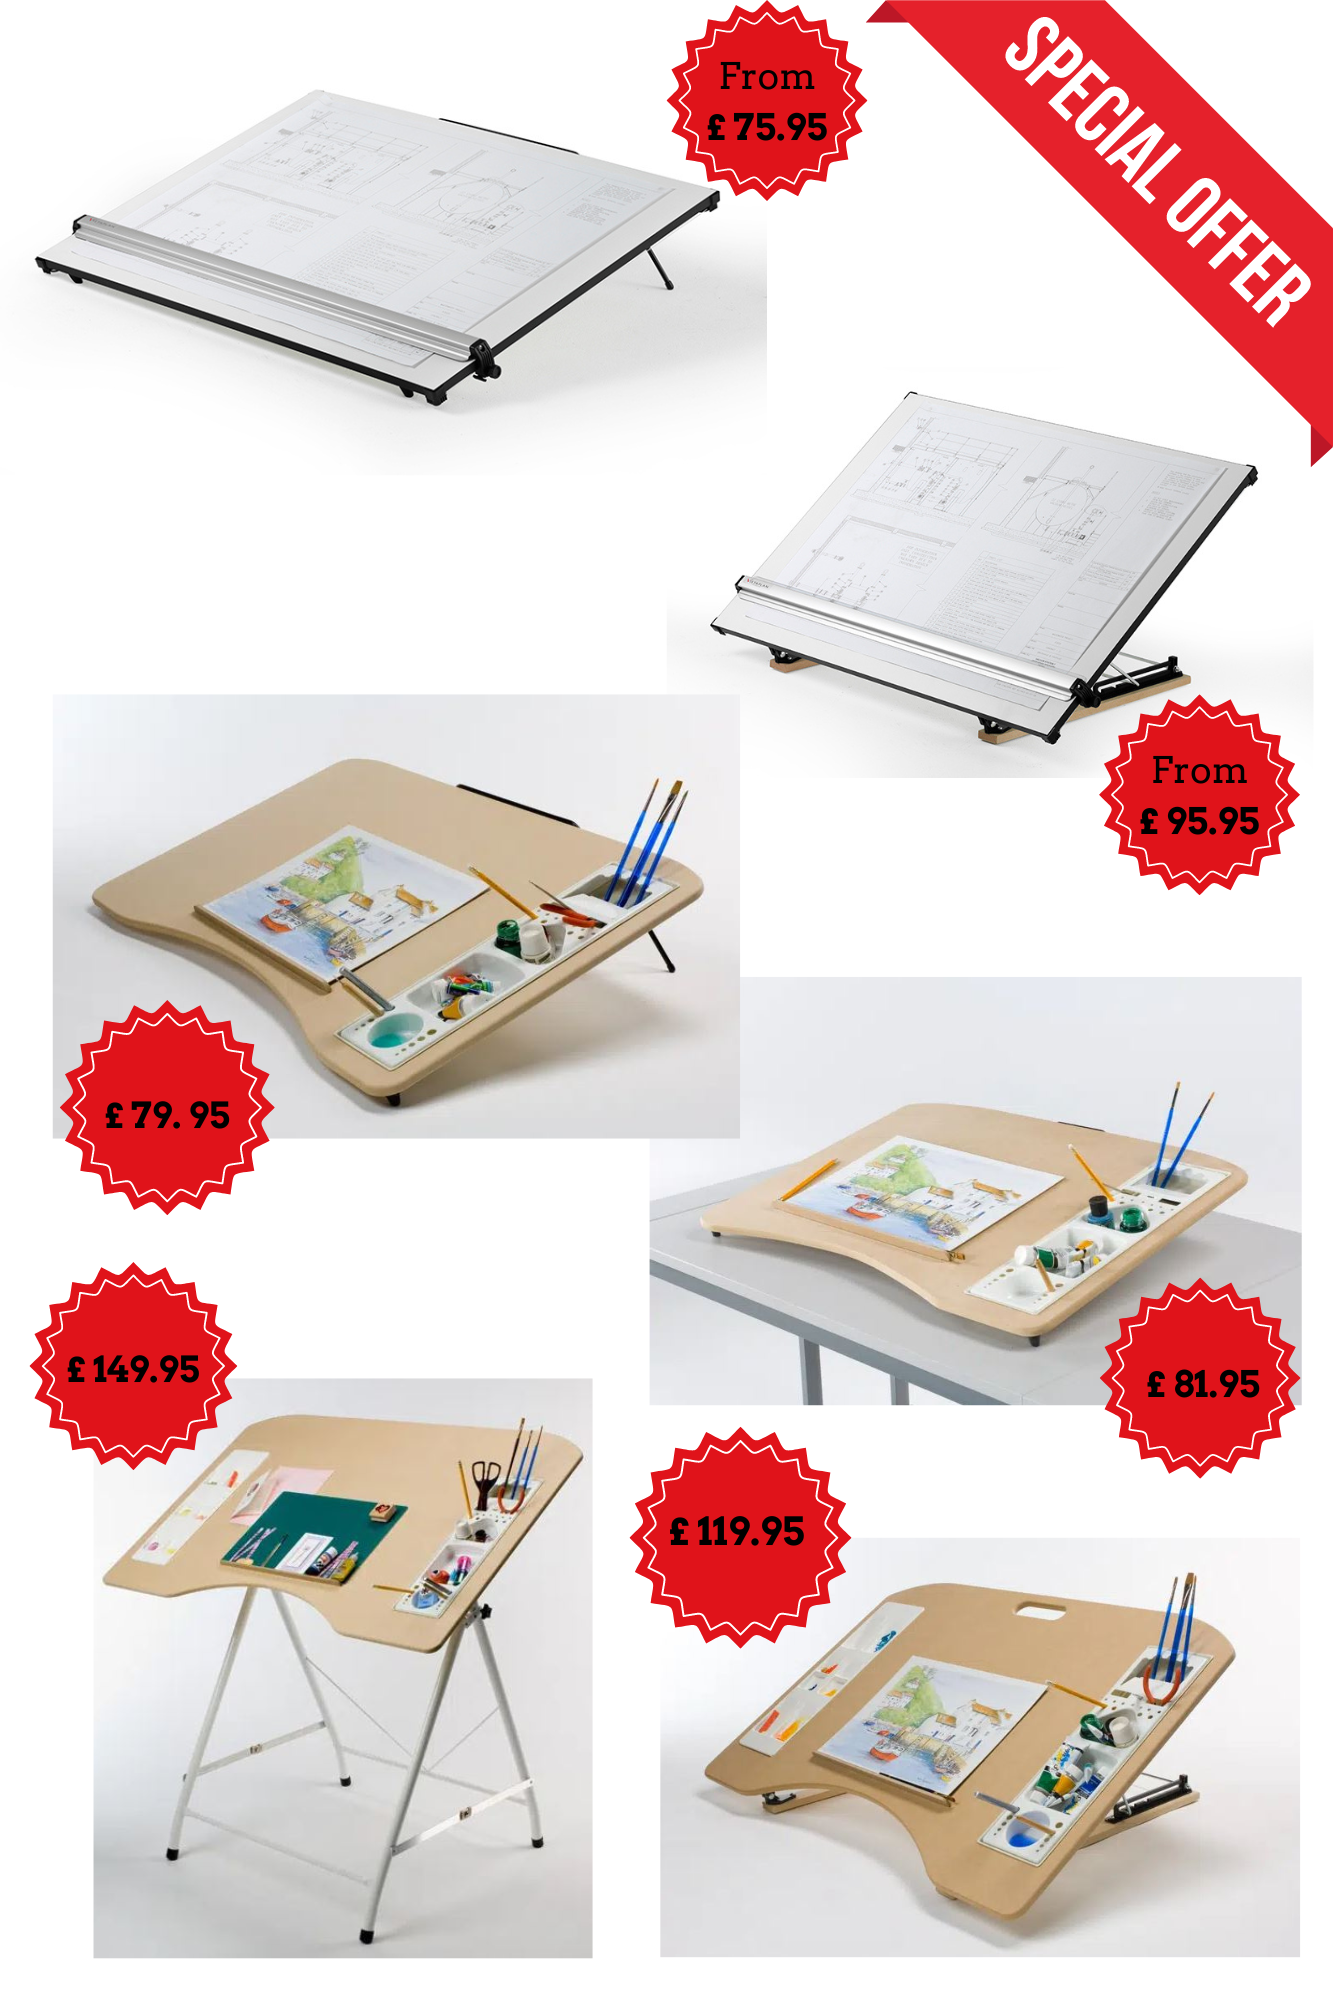 Vistaplan Announces Limited Time Offer on Select Desktop Drawing Boards and Artwork Stations